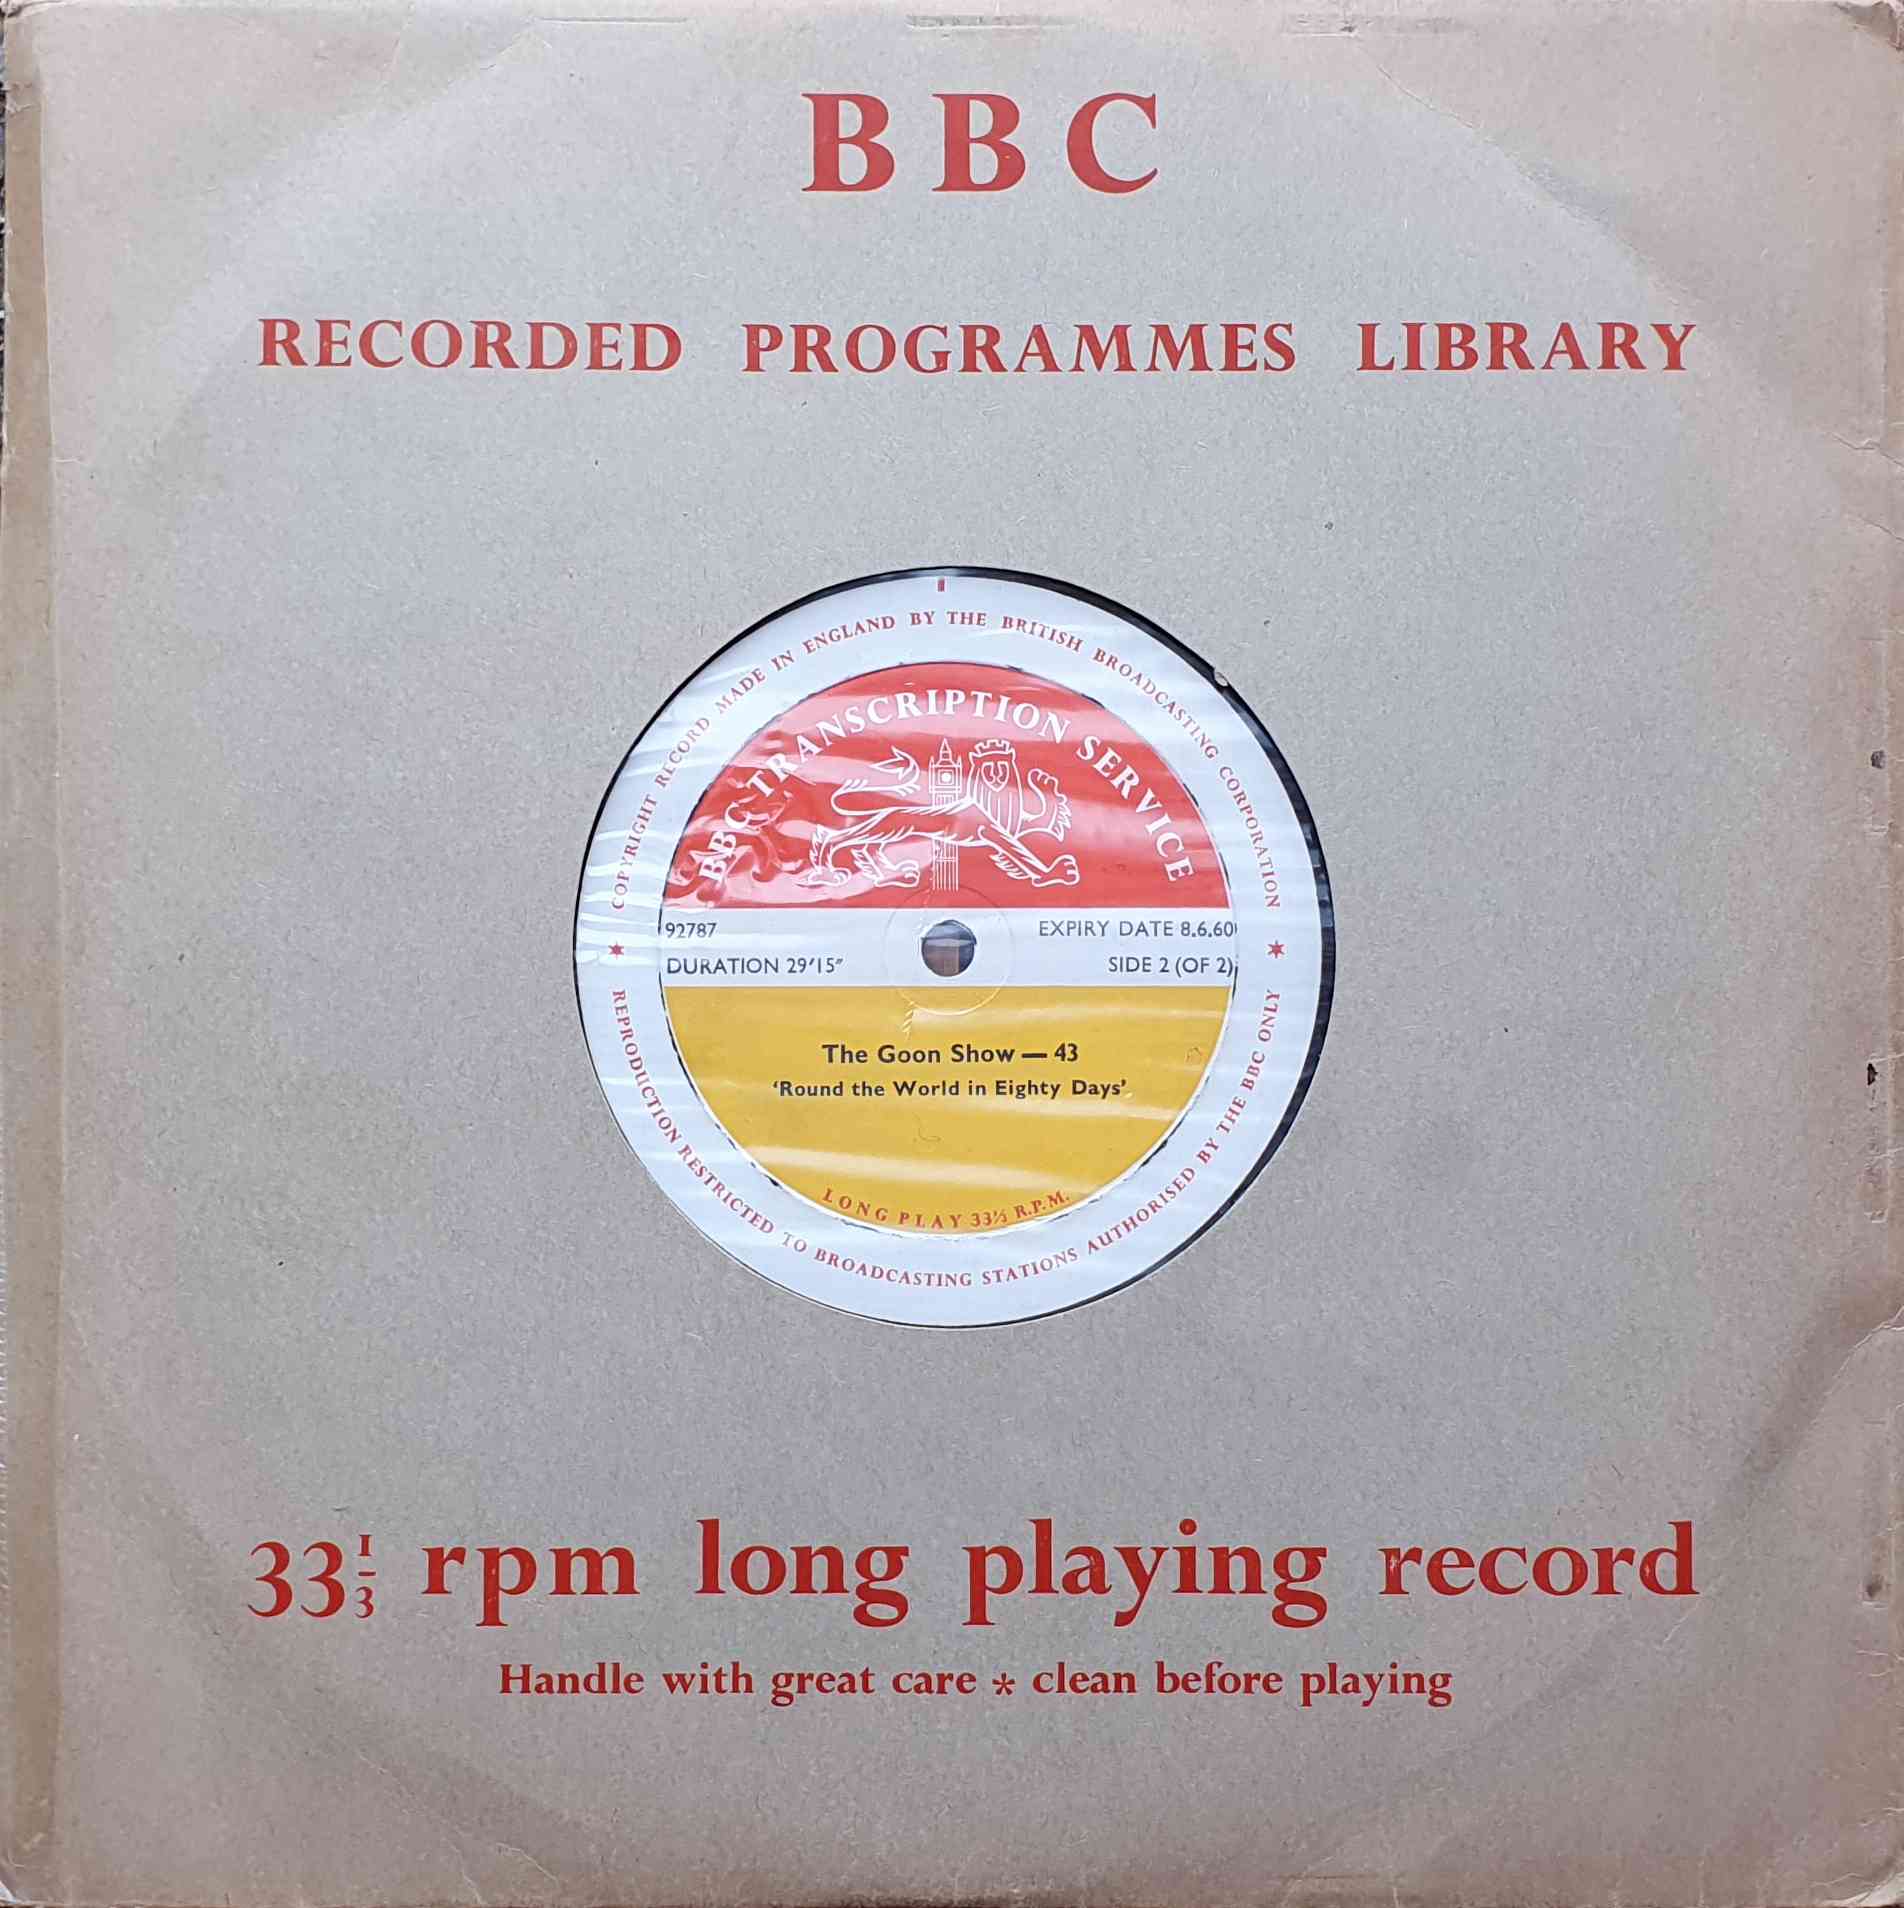 Picture of 92787 The Goon Show - 43 / 44 (Side 2 of 2) by artist Unknown from the BBC records and Tapes library